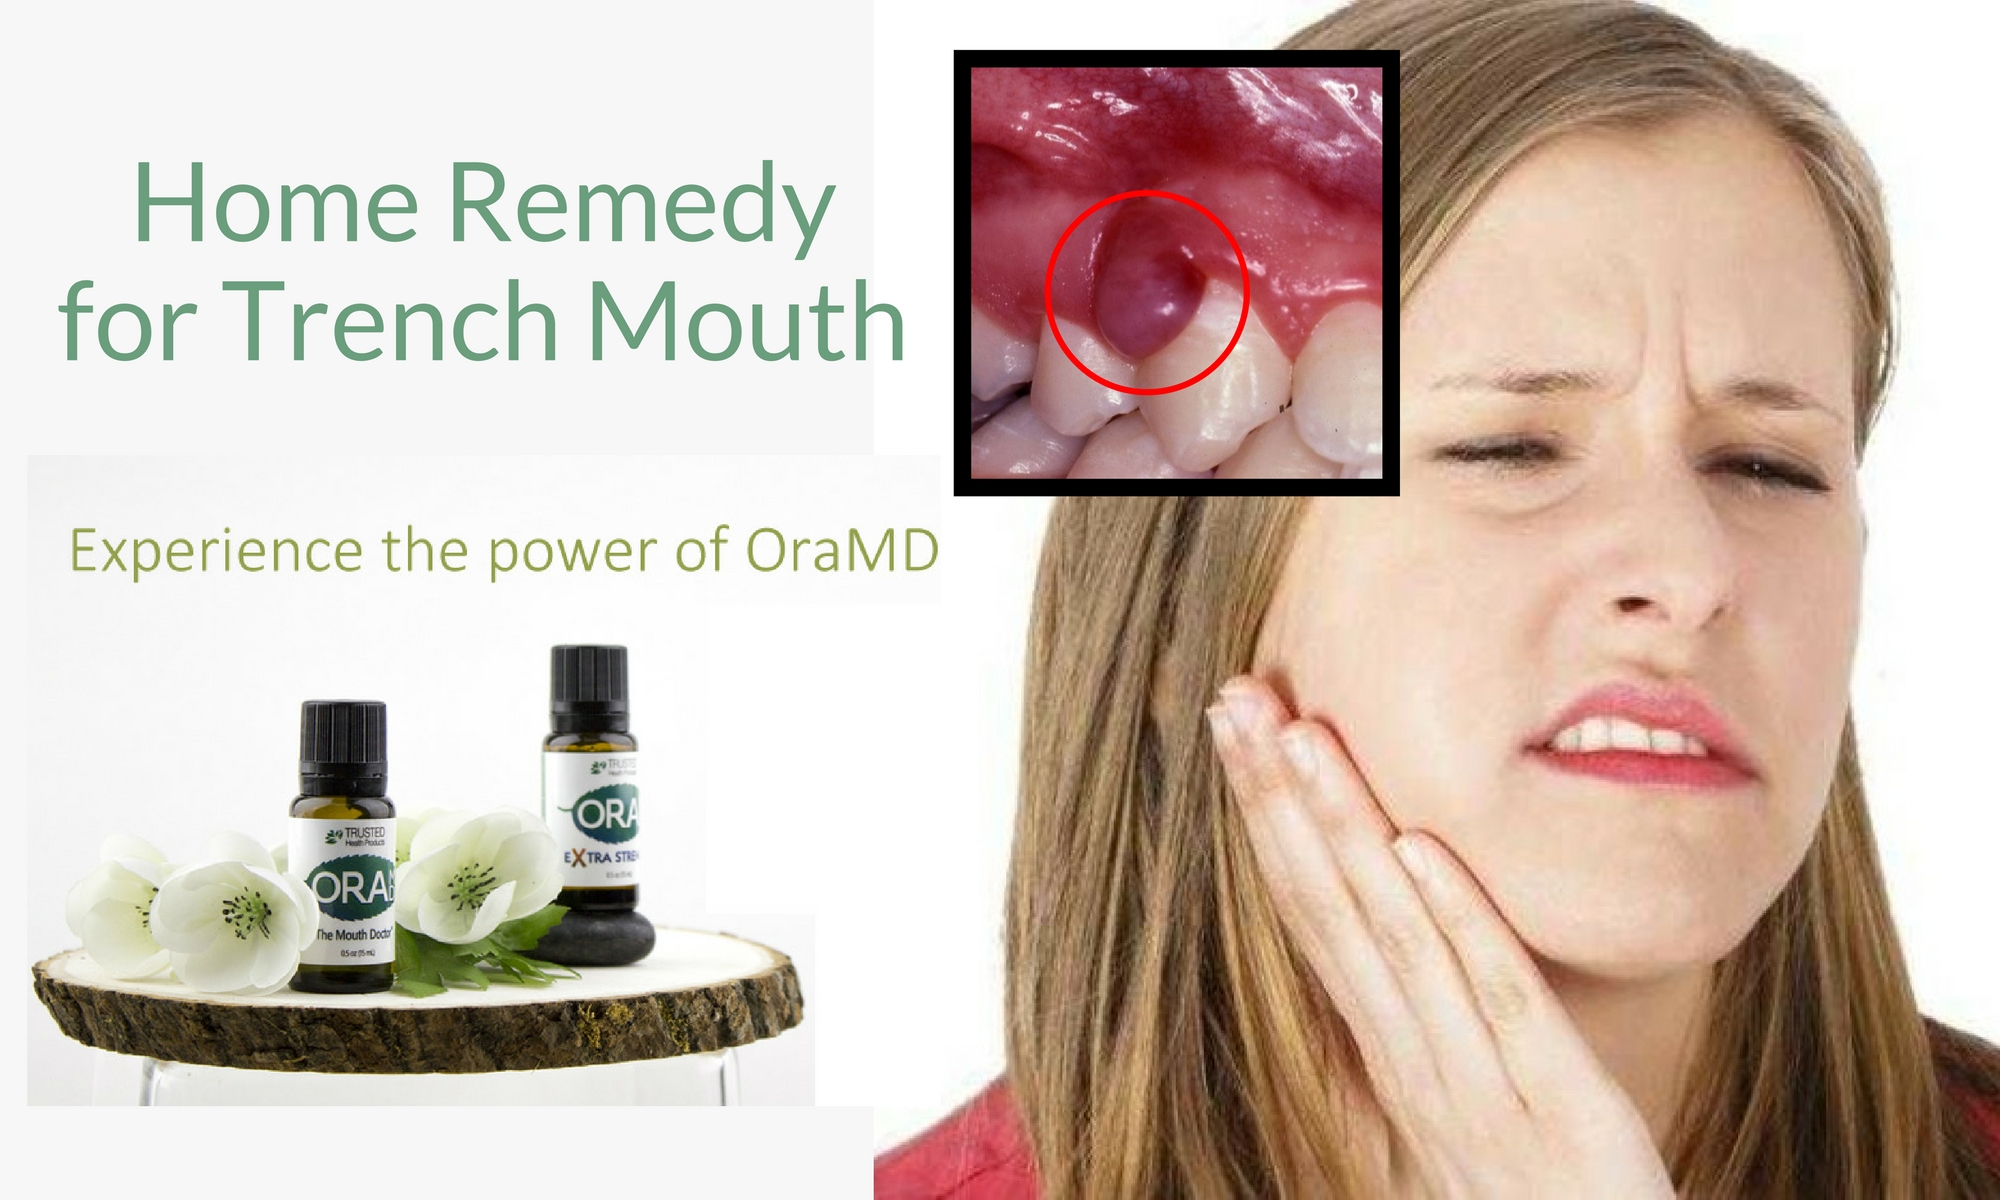 Home Remedy for Trench Mouth